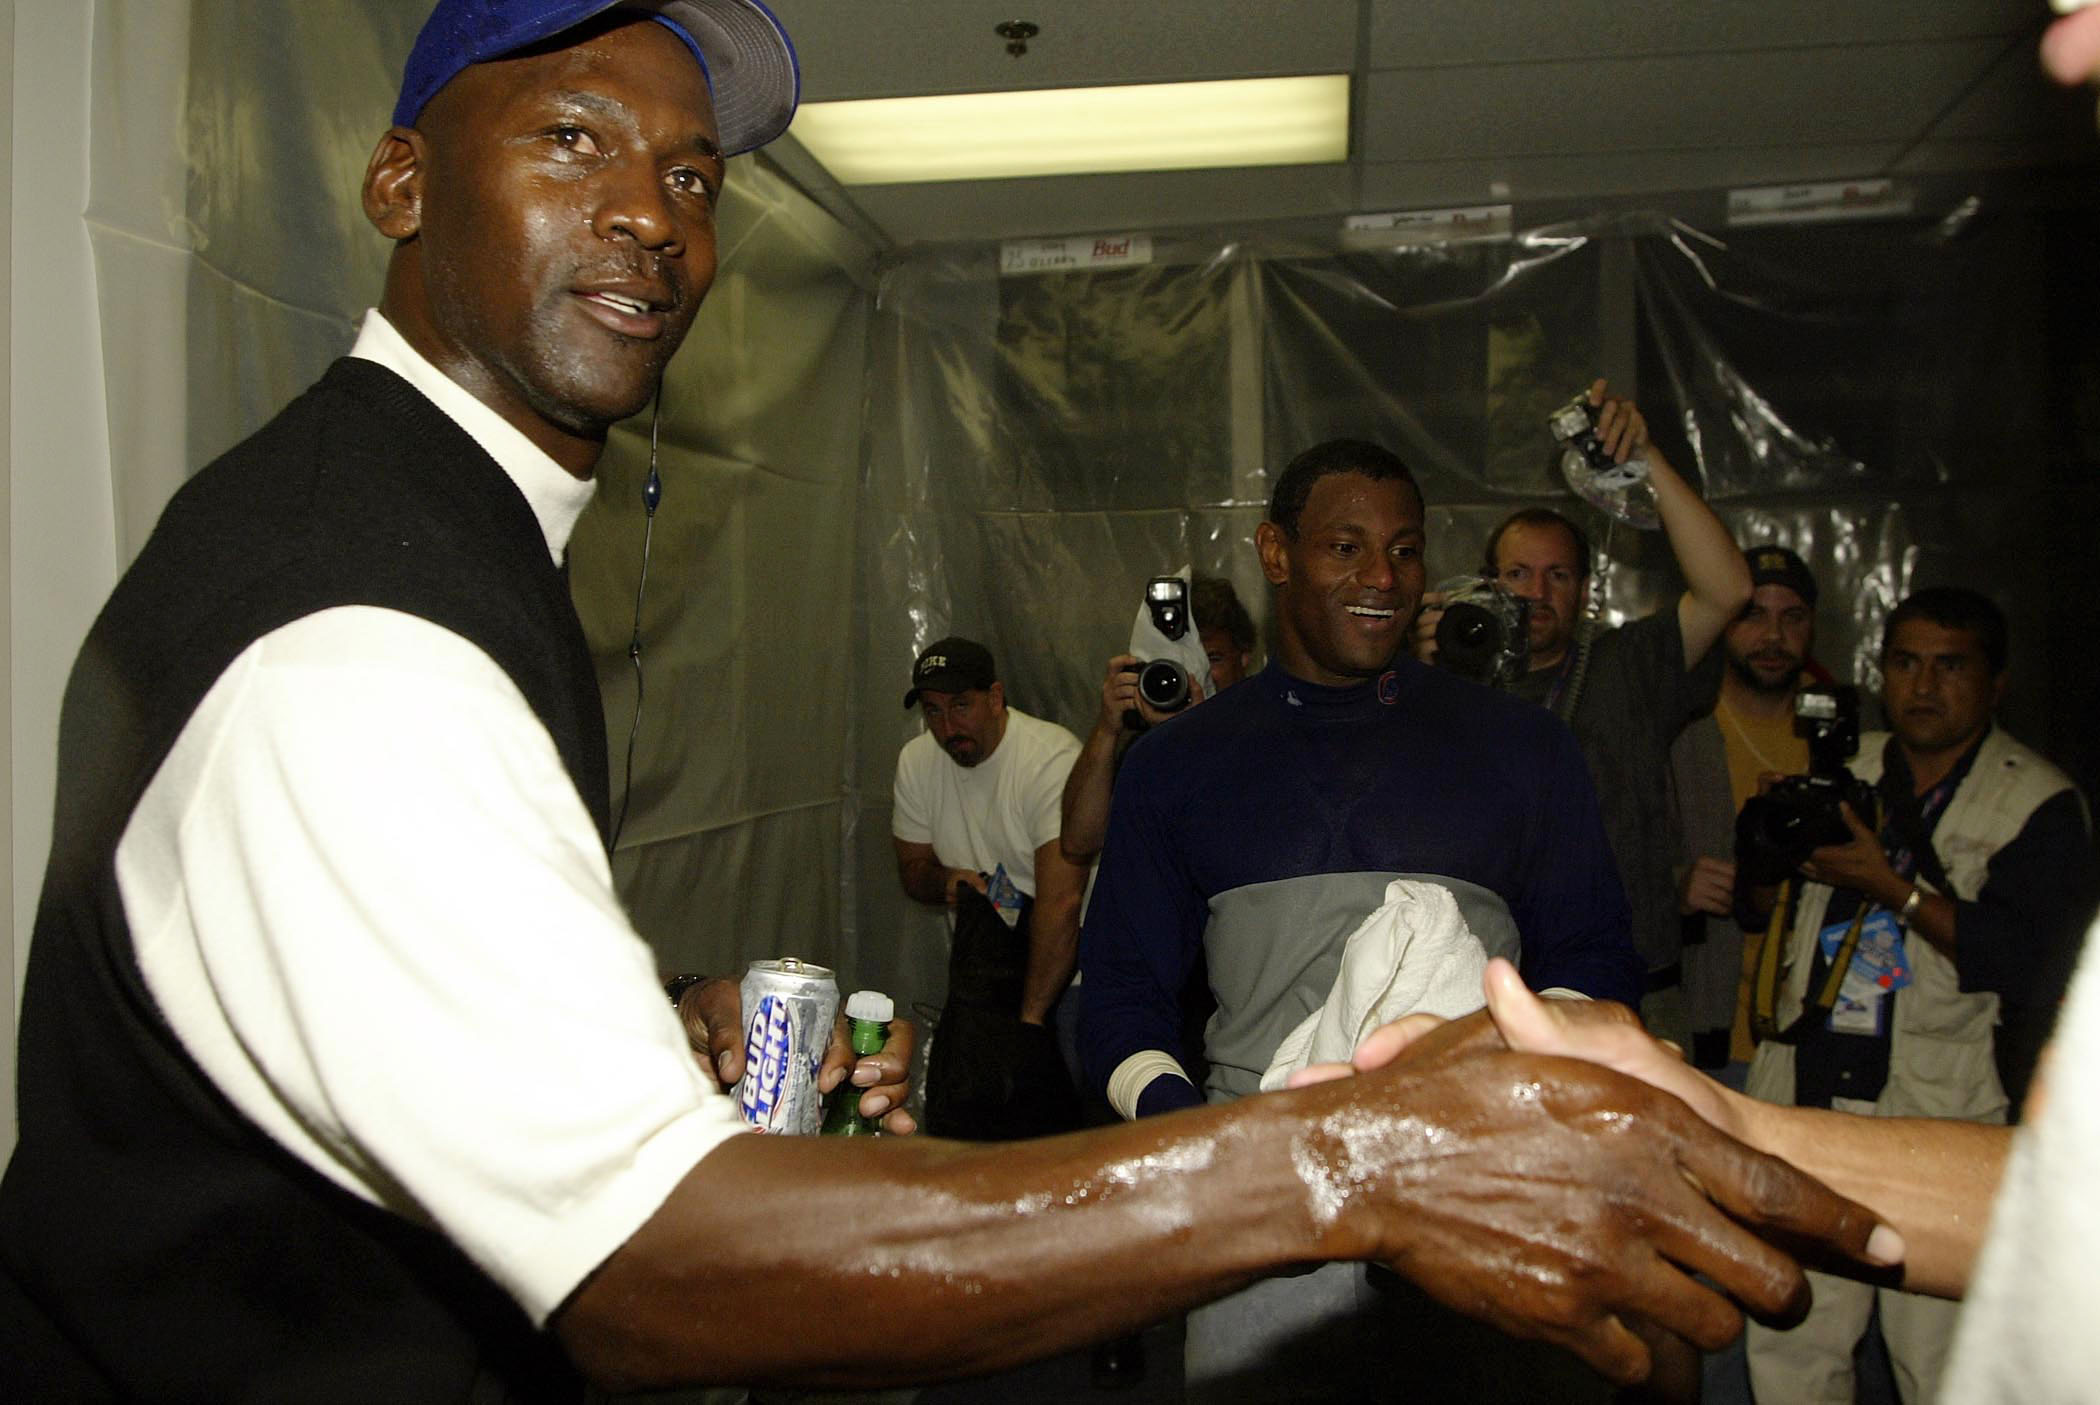 ATLANTA - OCTOBER 5:  Former Chicago Bull Michael Jordan celebrates with Sammy Sosa #21 and the Chicago Cubs in the locker room after the Chicago Cubs defeated the Atlanta Braves 5-1 during Game 5 of the National League Division Series between the Chicago